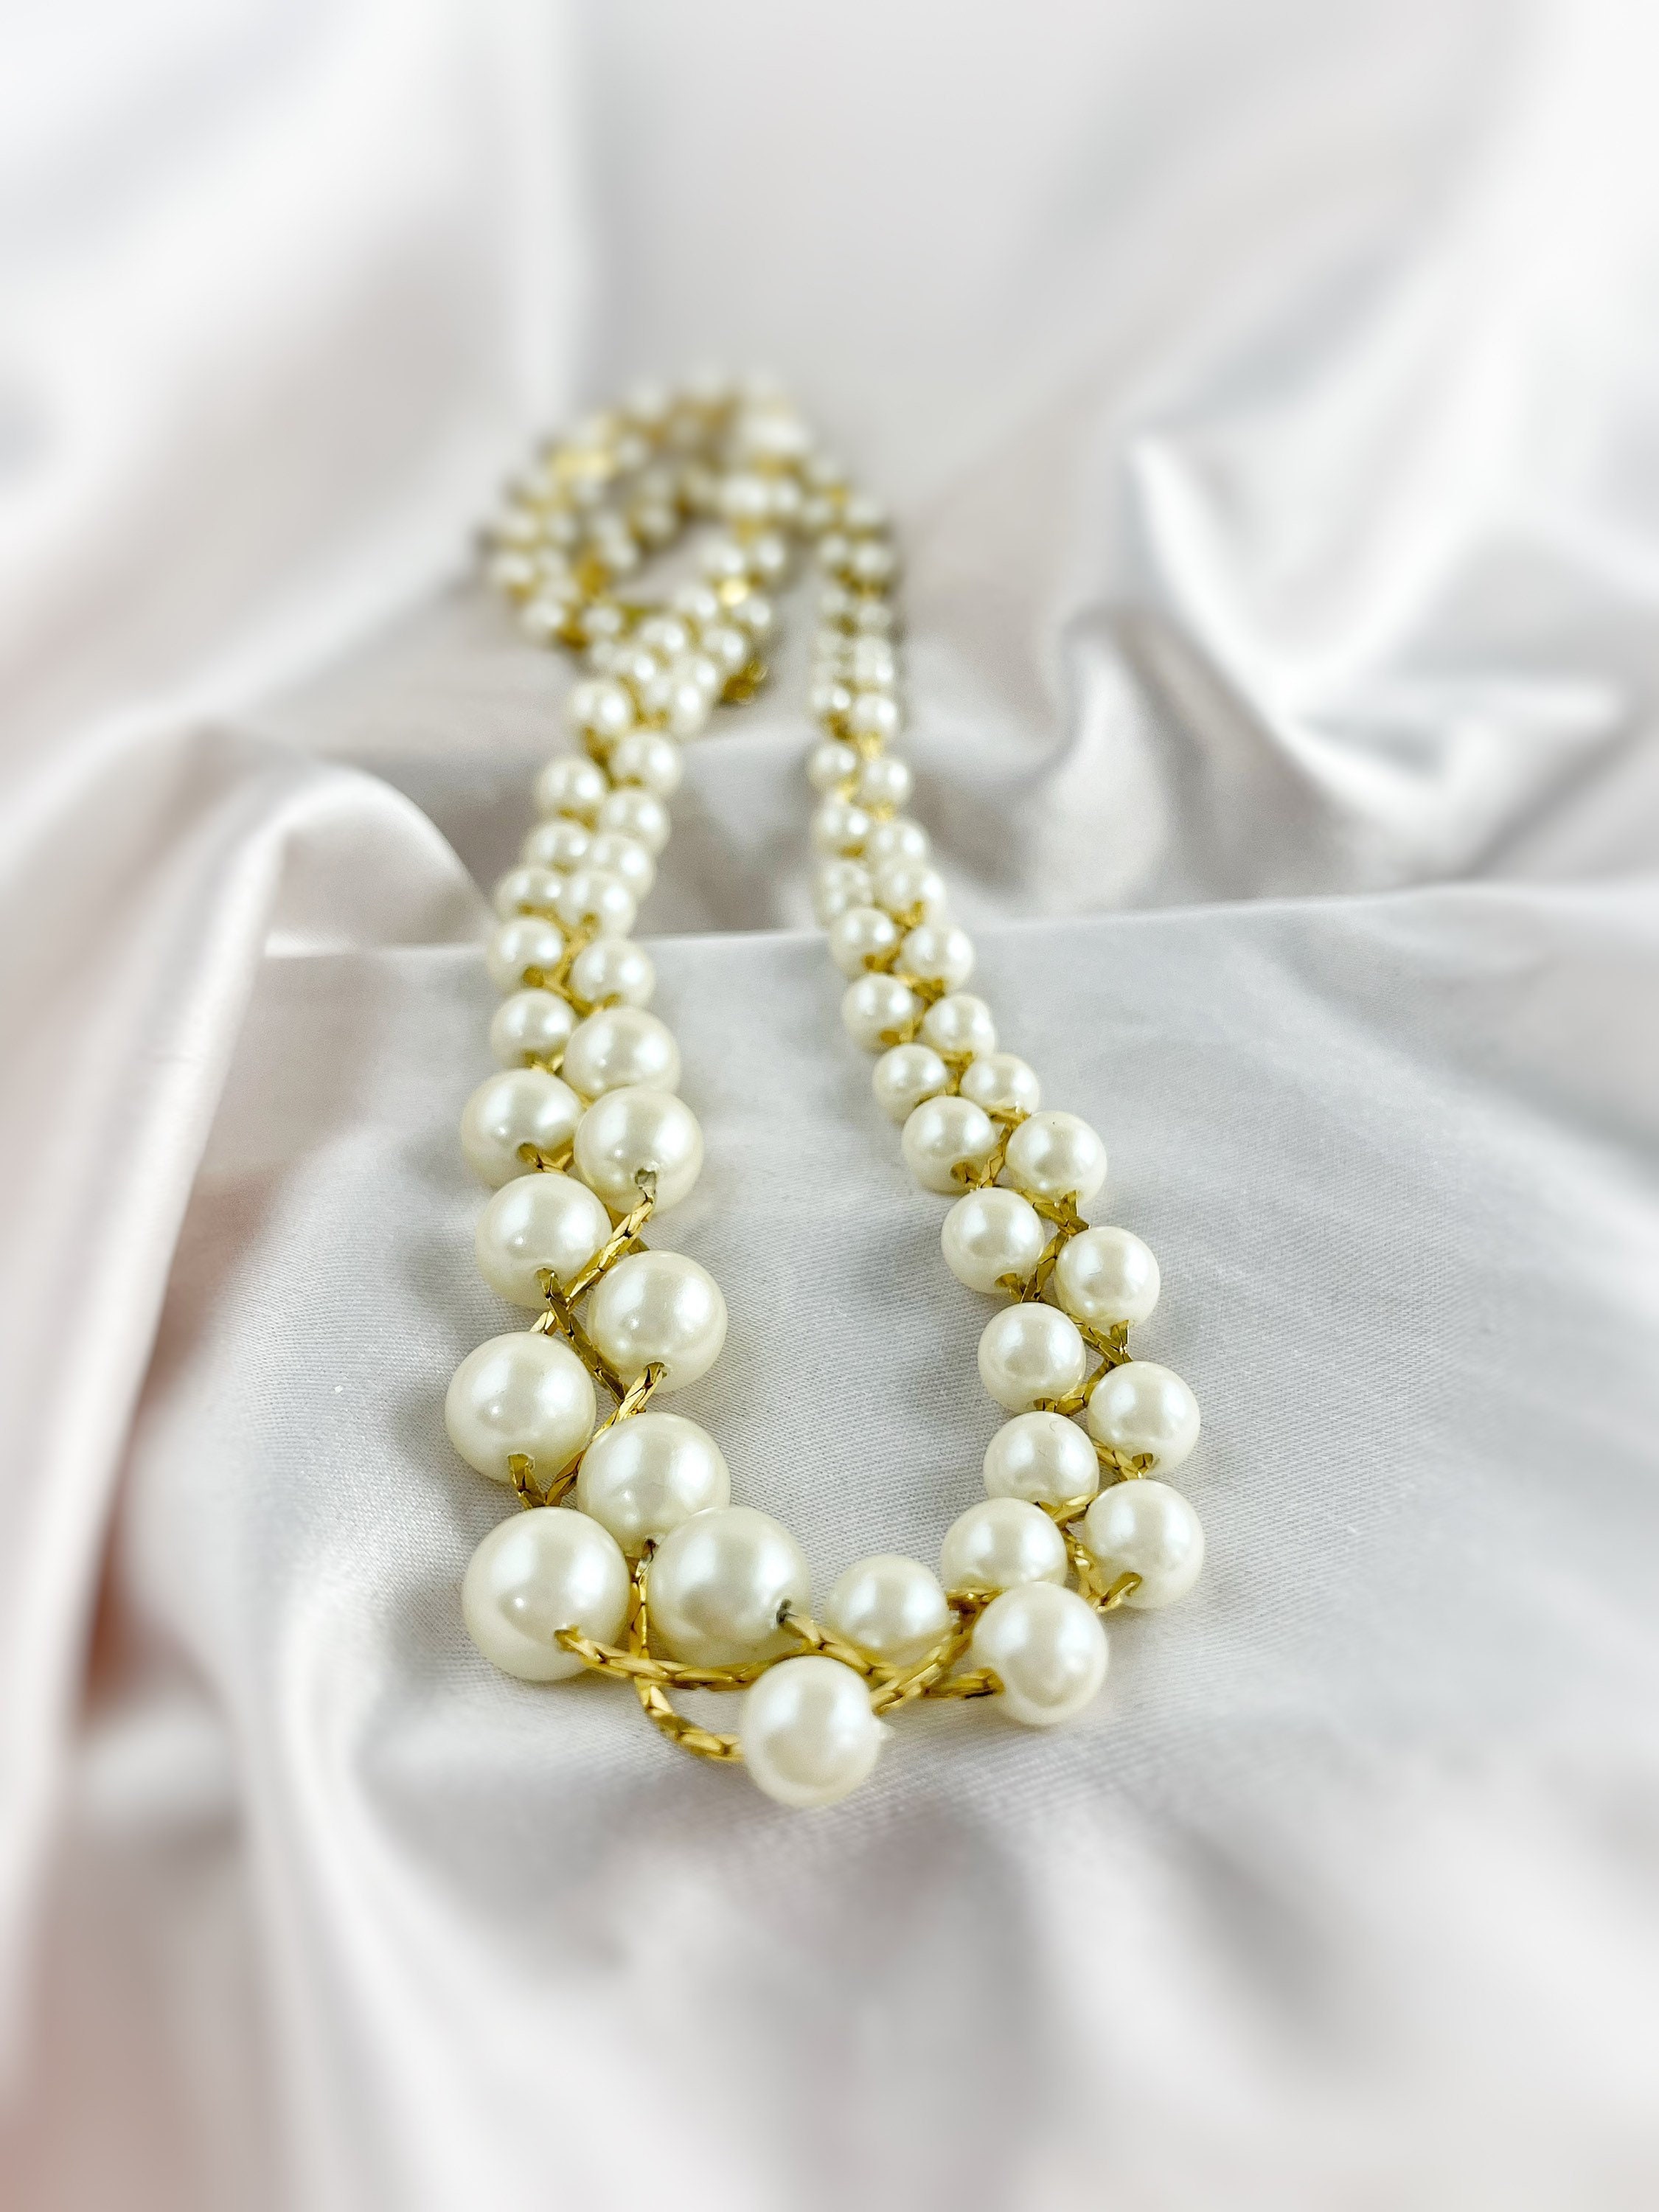 White pearls necklace for woman on silk hand knotted naturali - JoyElly